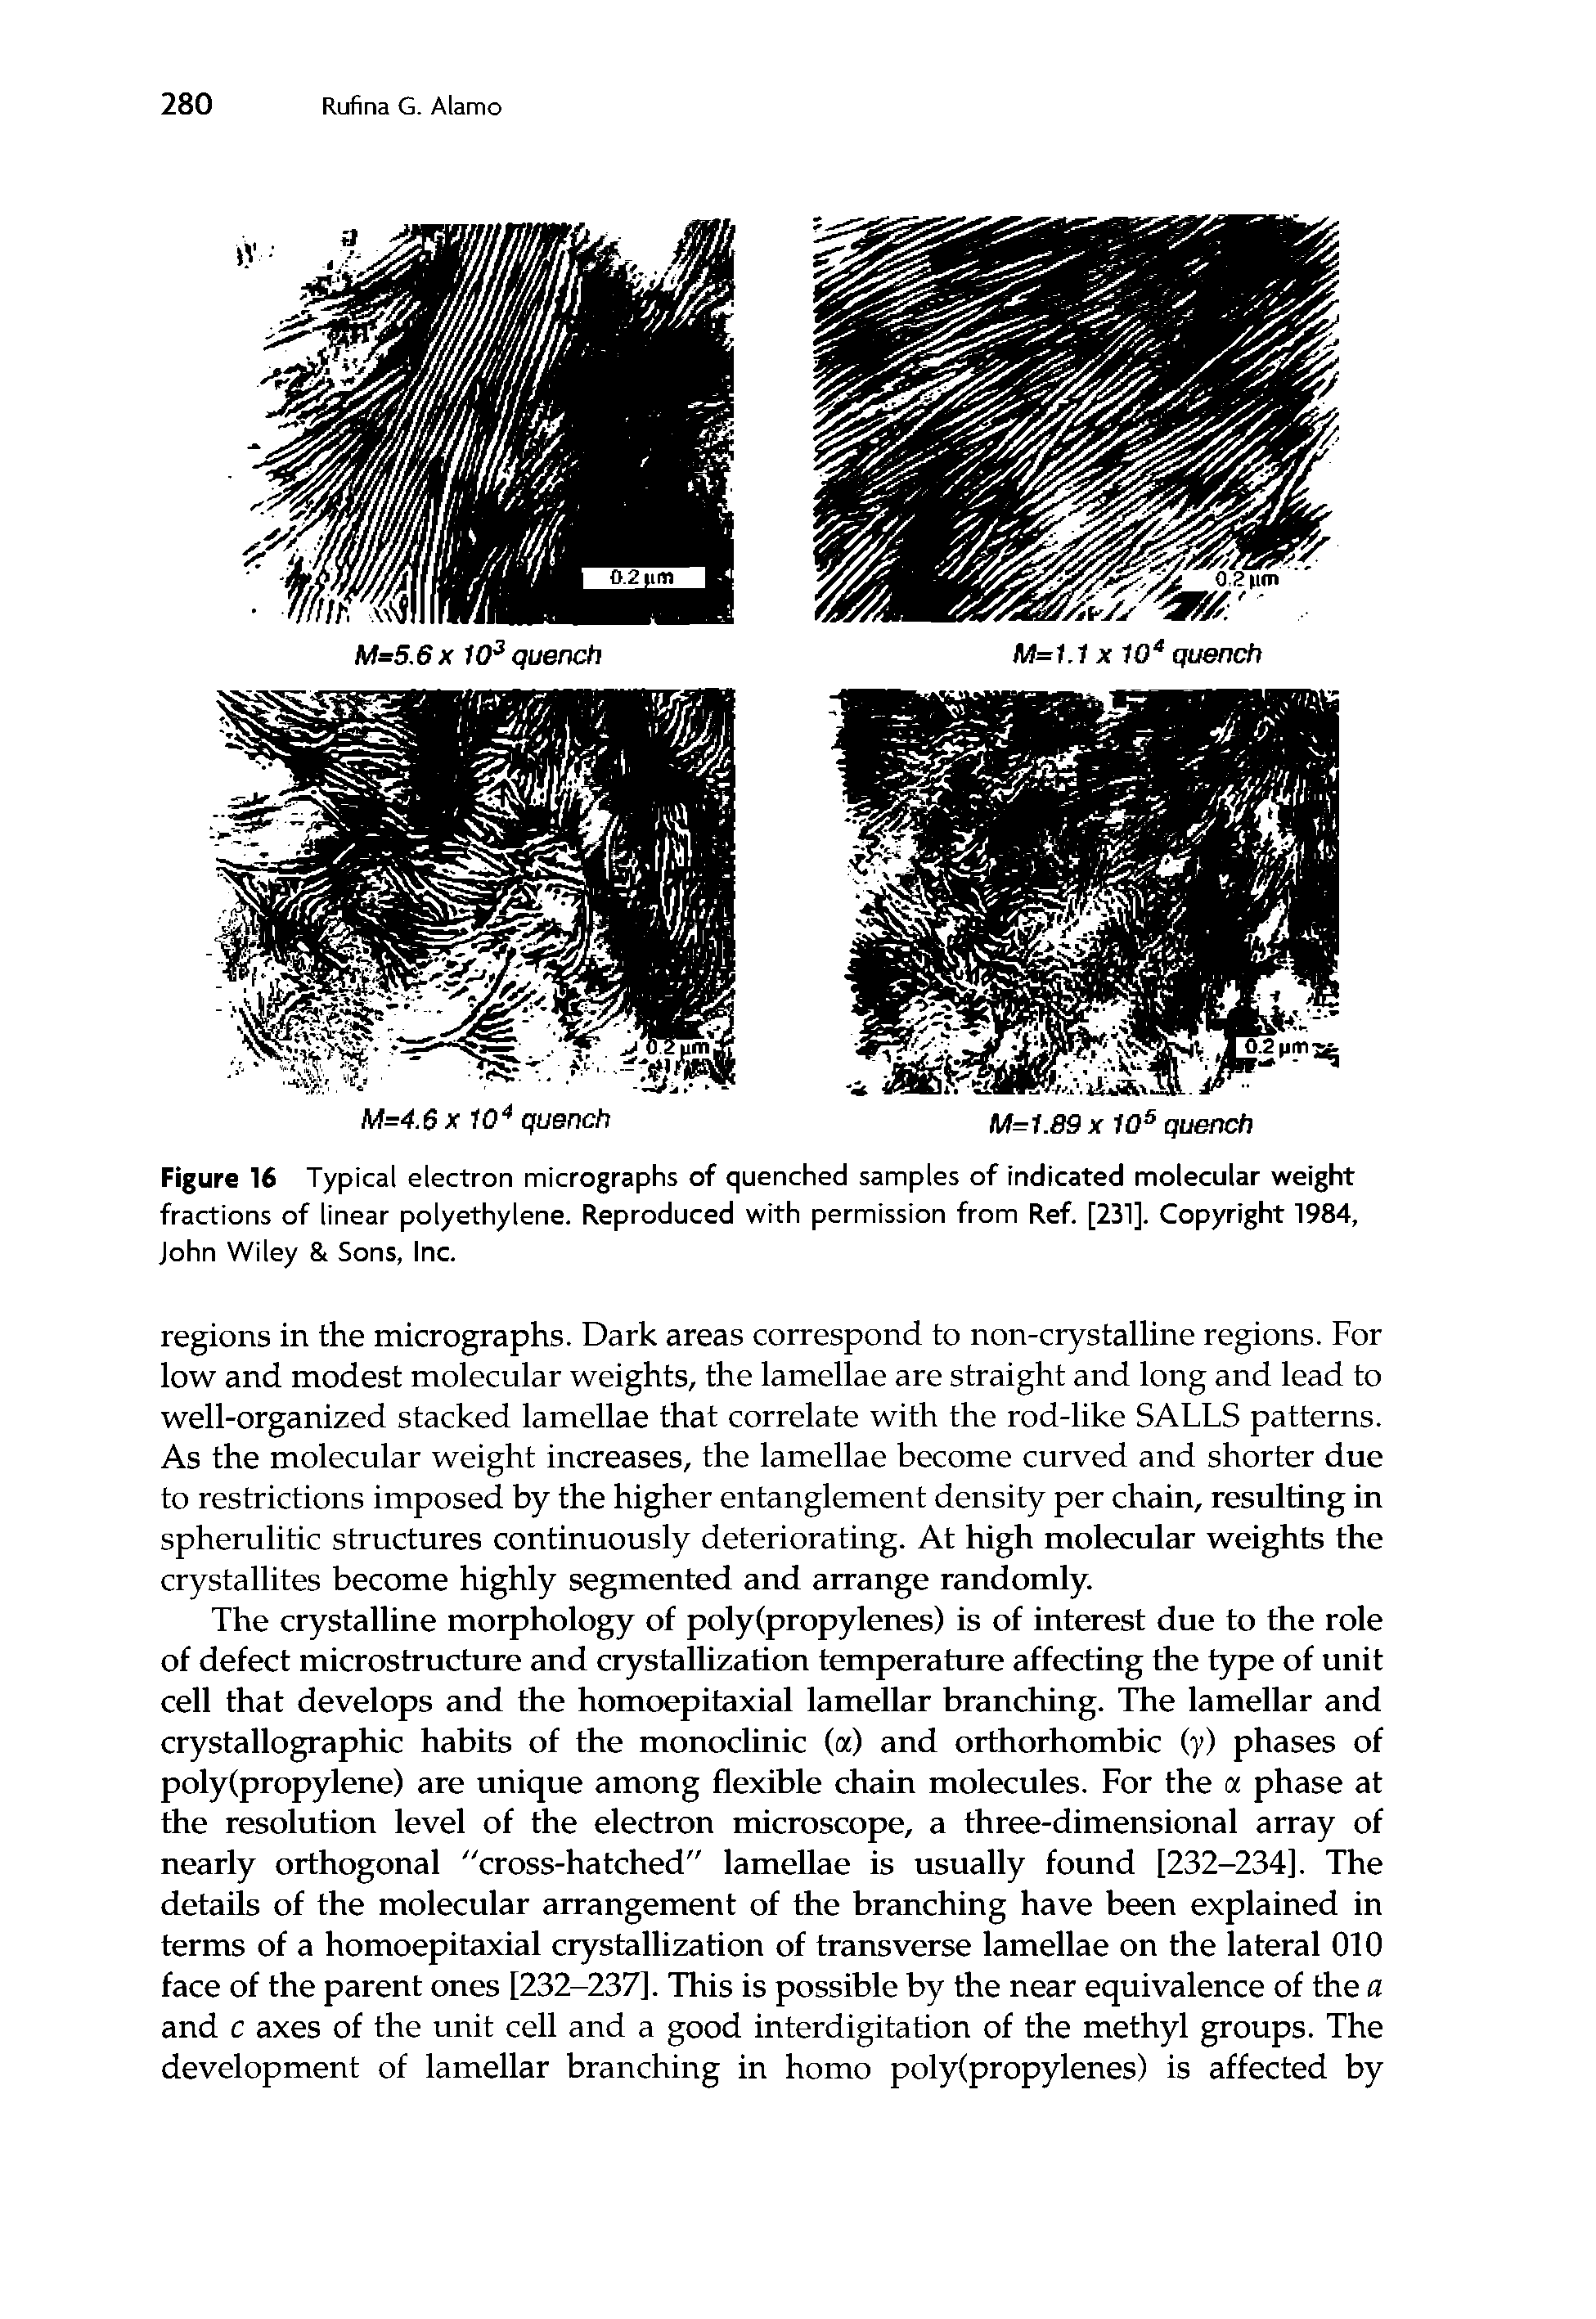 Figure 16 Typical electron micrographs of quenched samples of indicated molecular weight fractions of linear polyethylene. Reproduced with permission from Ref. [231]. Copyright 1984, John Wiley 8t Sons, Inc.